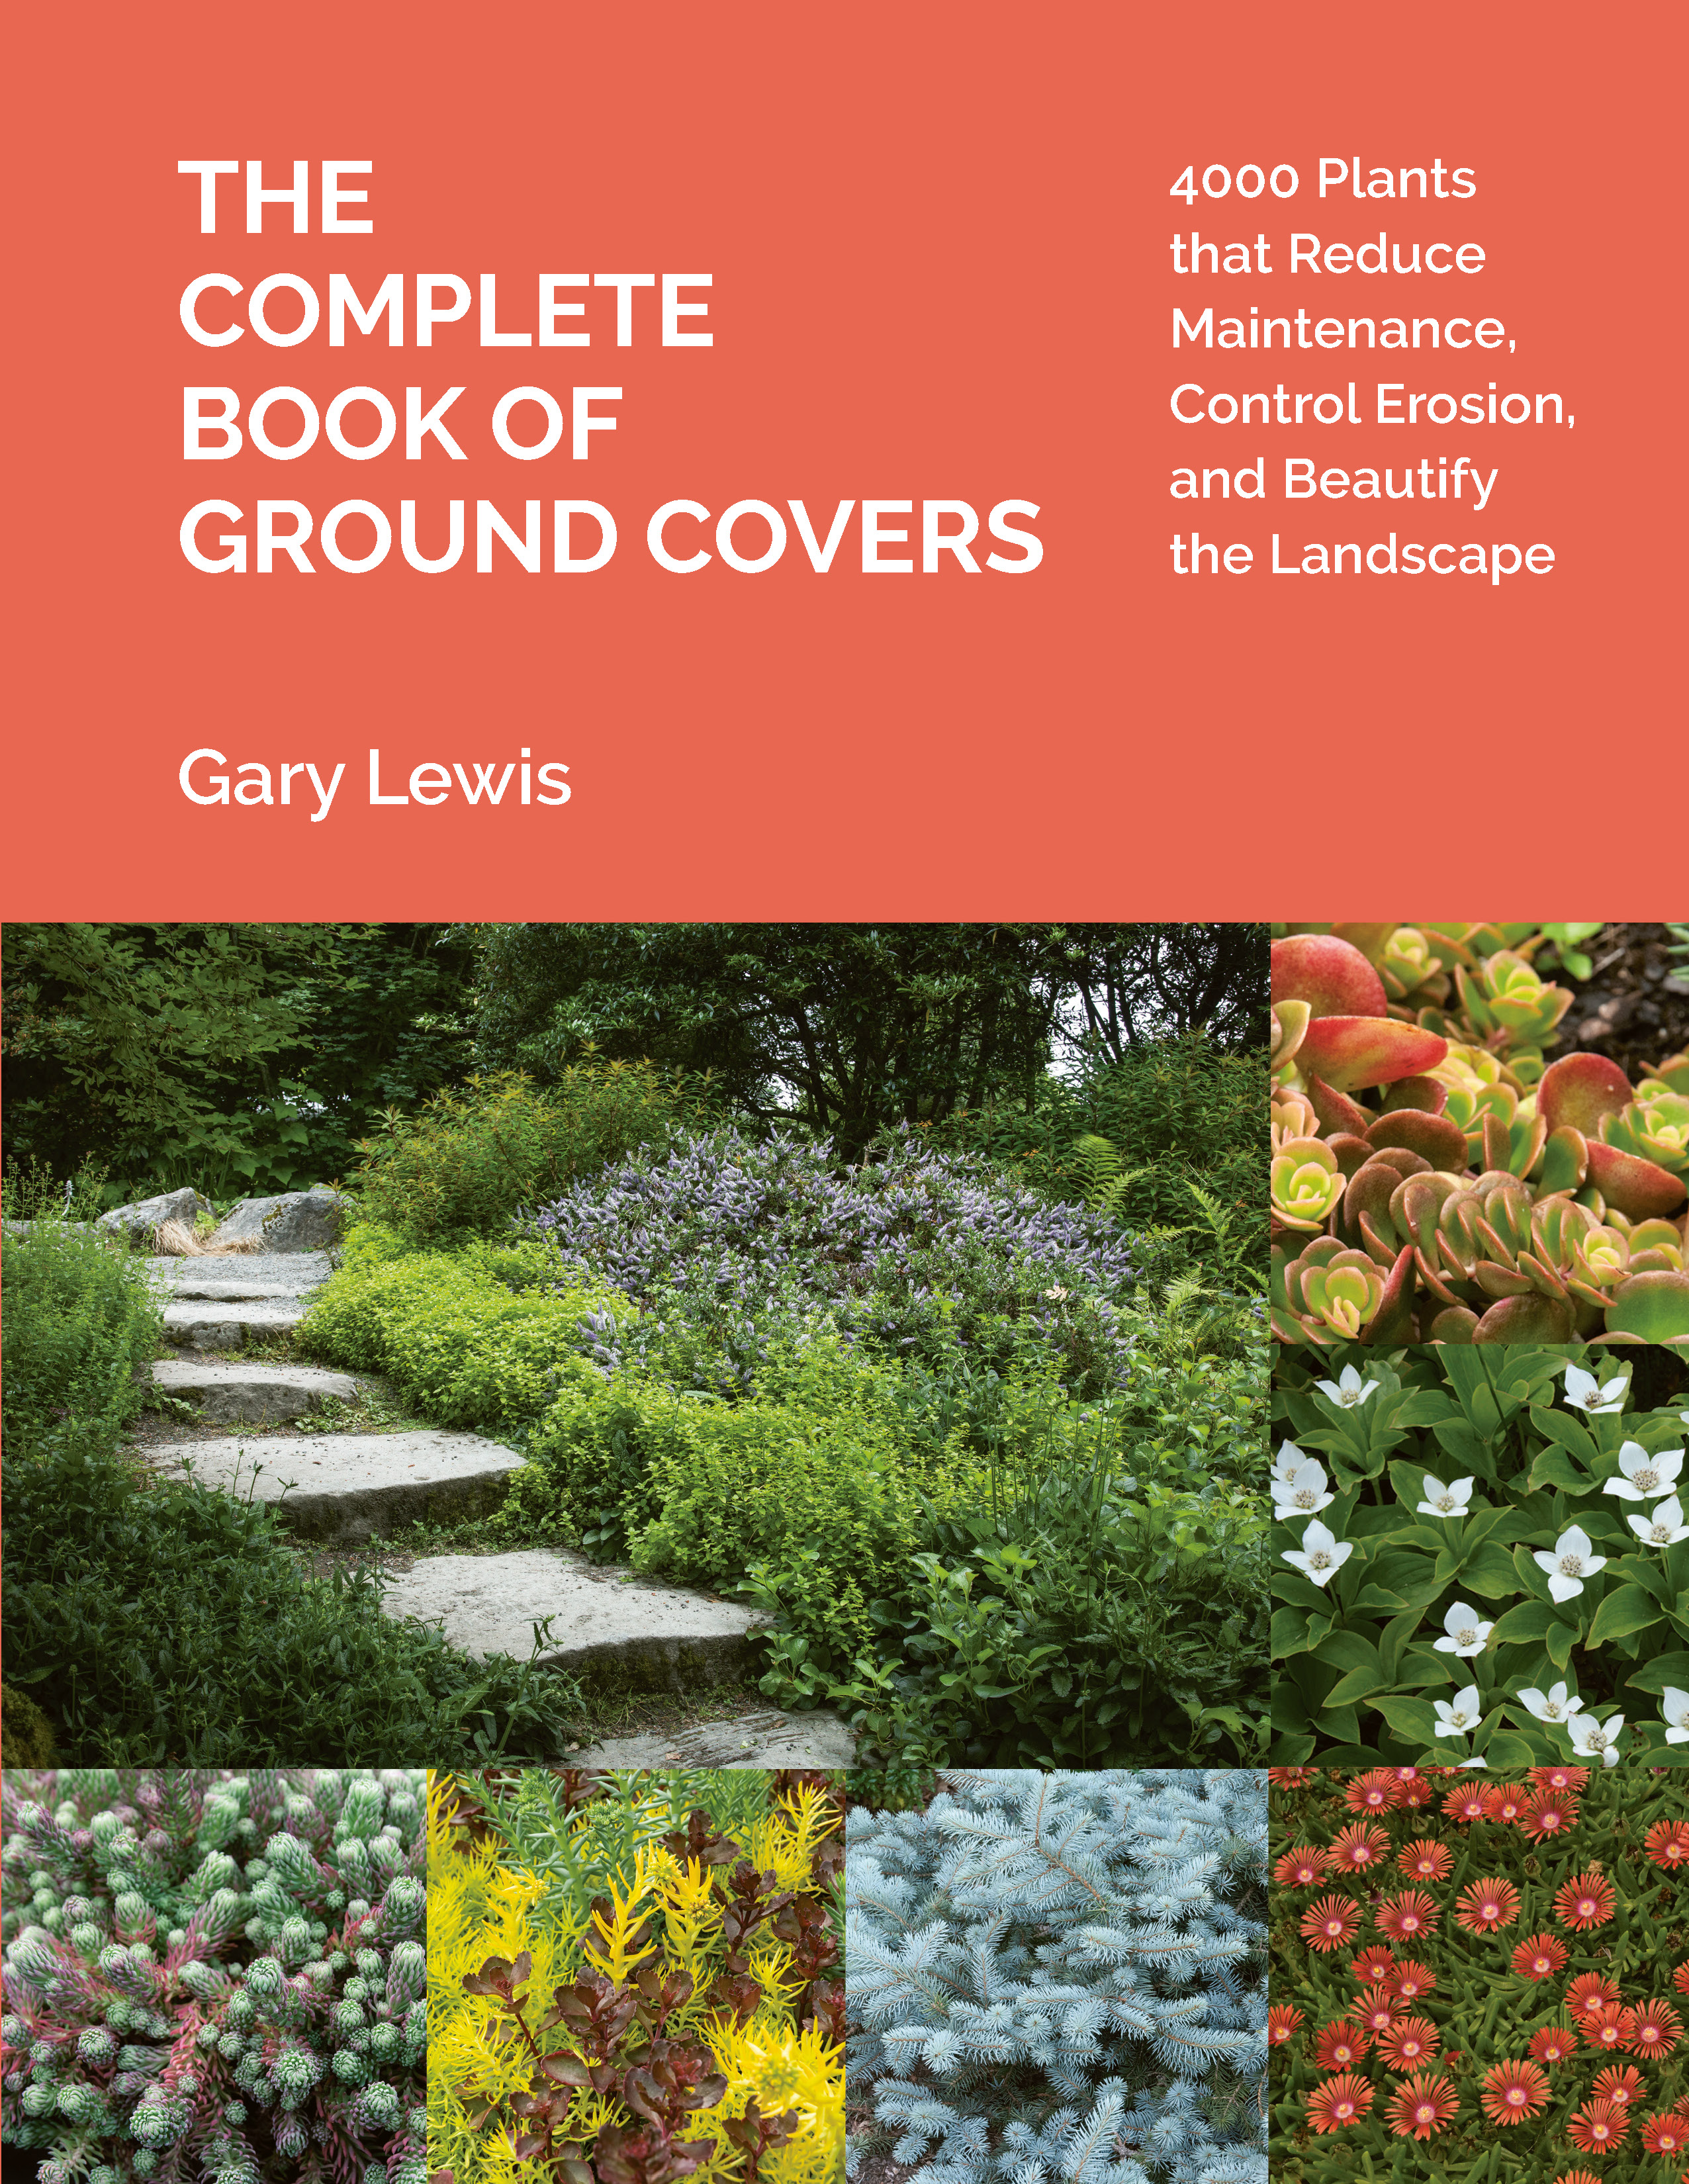 The Complete Book of Ground Covers by Gary Lewis Hachette Book Group